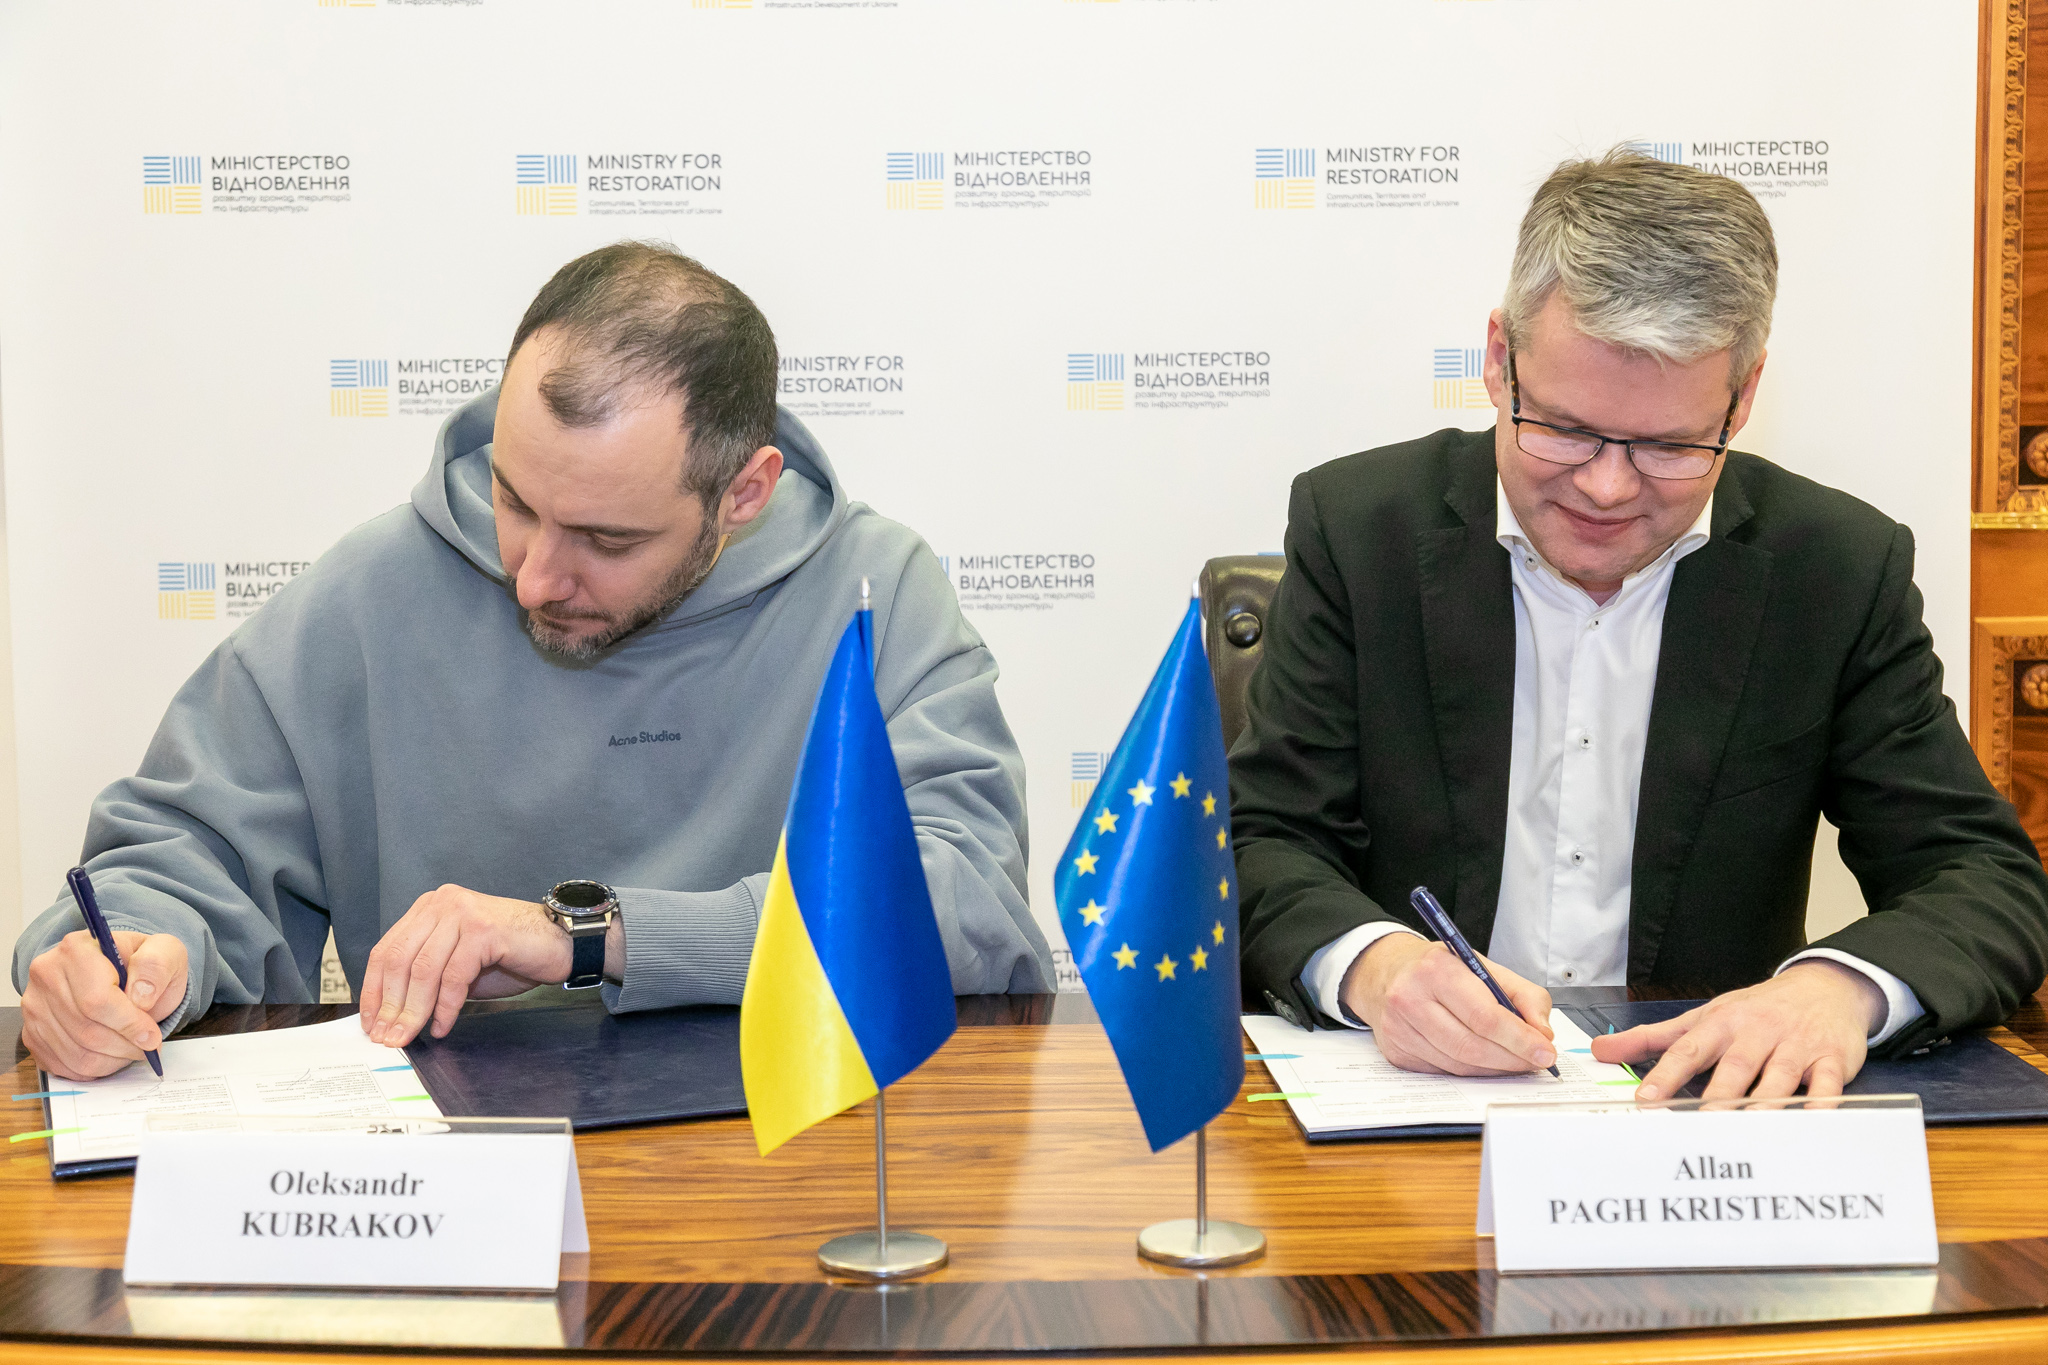 The Deputy Prime Minister for Restoration of Ukraine Oleksandr Kubrakov and the Head of the EUACI Allan Pagh Kristensen signed the MoU